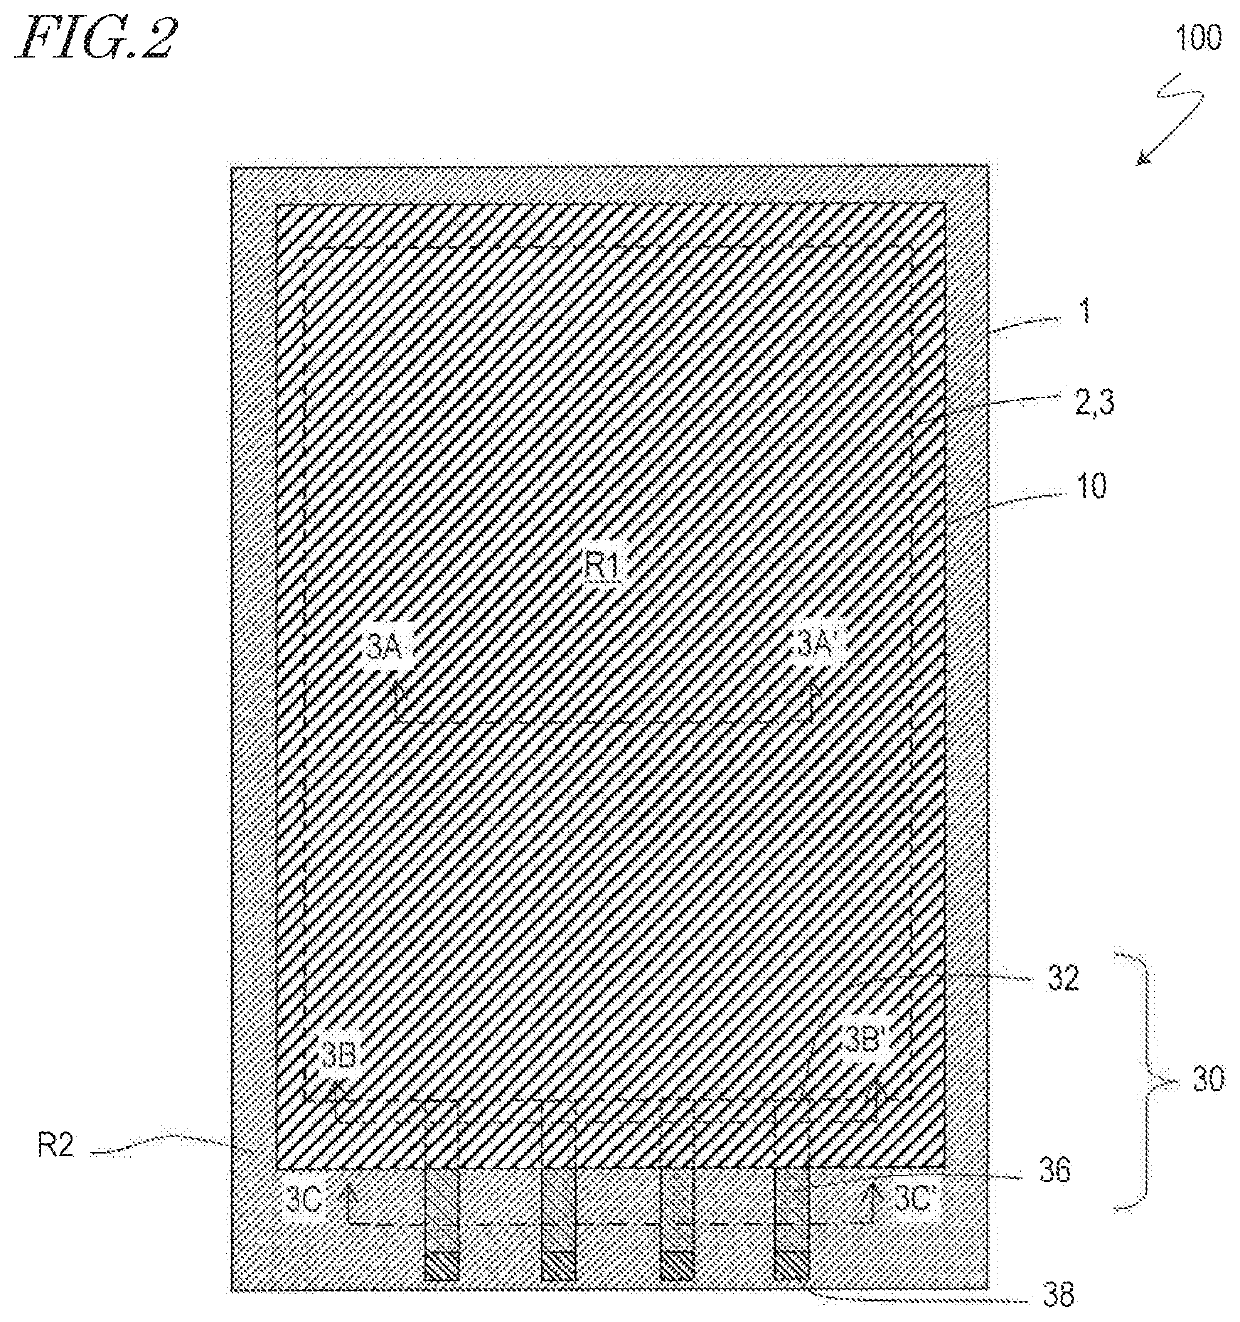 Method for producing organic electroluminescent display device comprising polydiacetylene layers